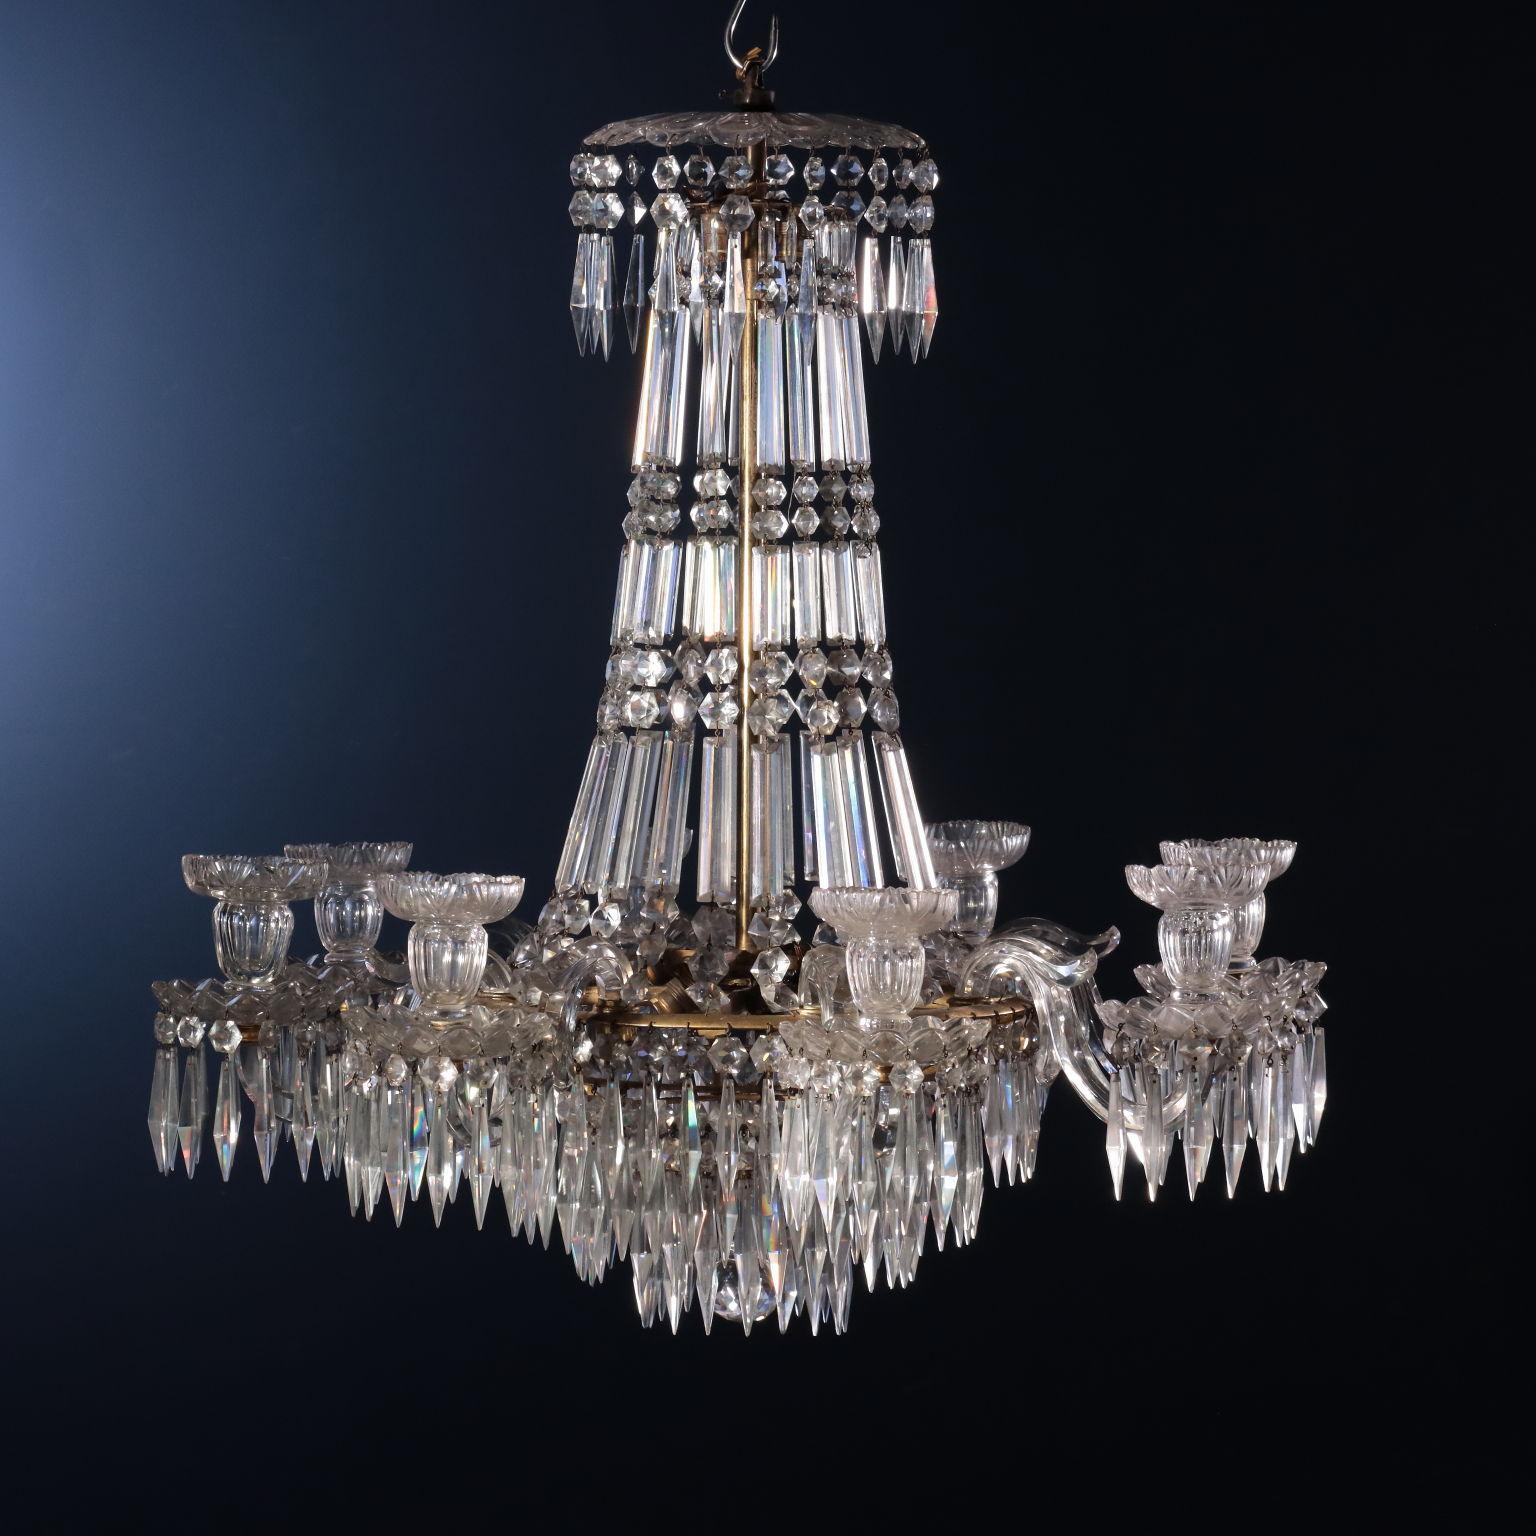 8-arm chandelier in cut crystal with candle holders. The arms are grafted onto a support structure in gilded brass with multiple levels in which there are the lodgings for the glasses of the arms. The brass structure supports a cascade of cut